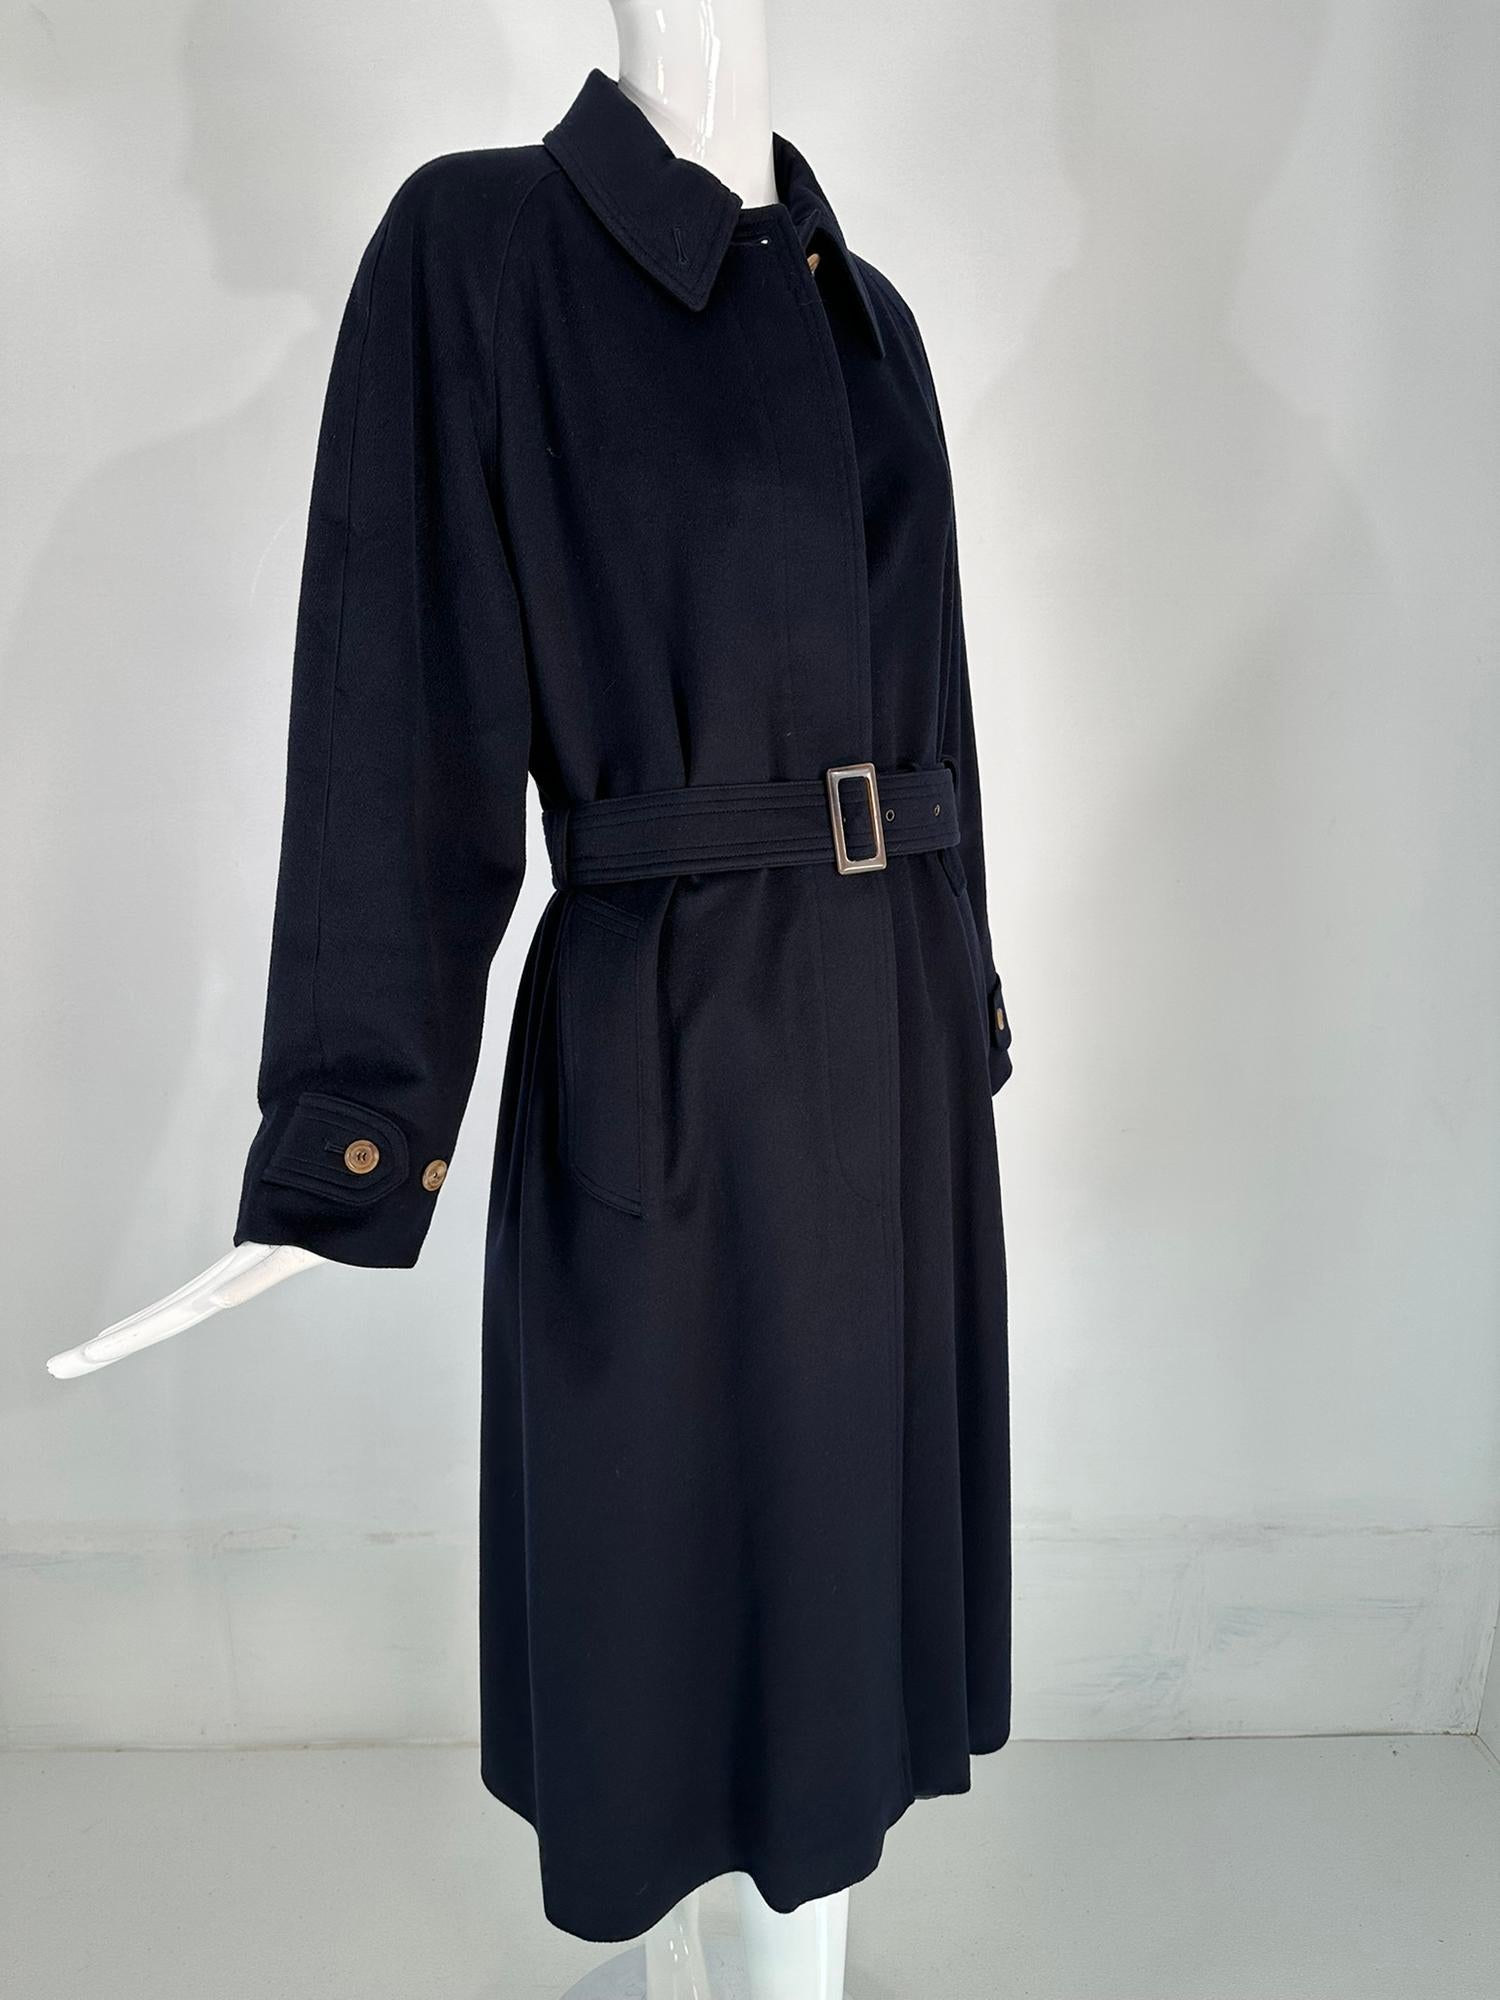 Giorgio Armani Classico Navy Blue Cashmere Raglan Sleeve Belted Over Coat  In Good Condition For Sale In West Palm Beach, FL